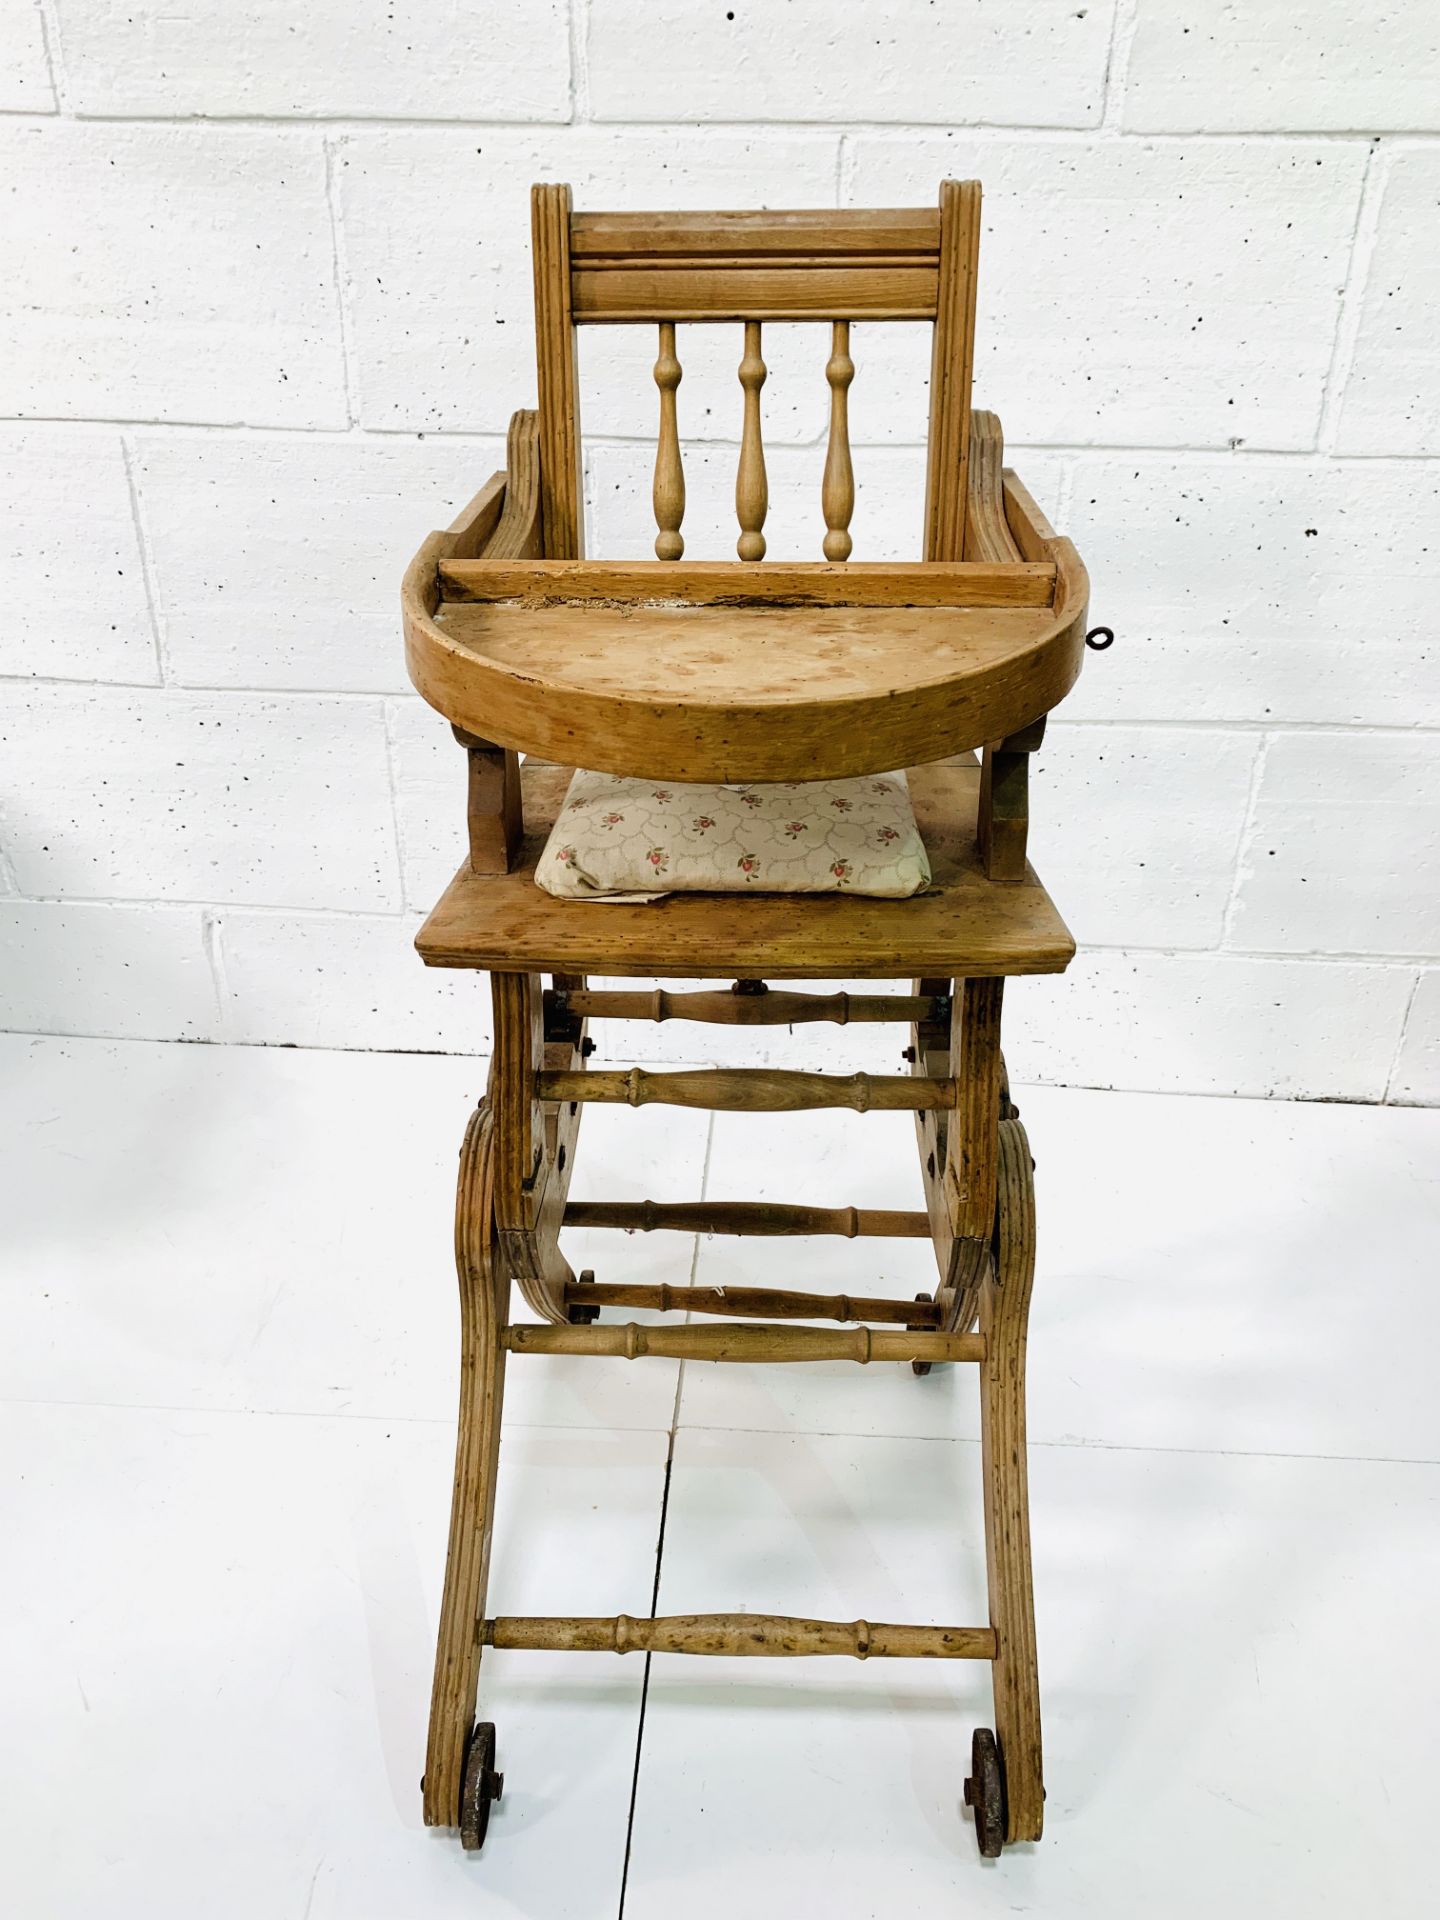 Metamorphic wooden high chair by S. Ockenden and Son.